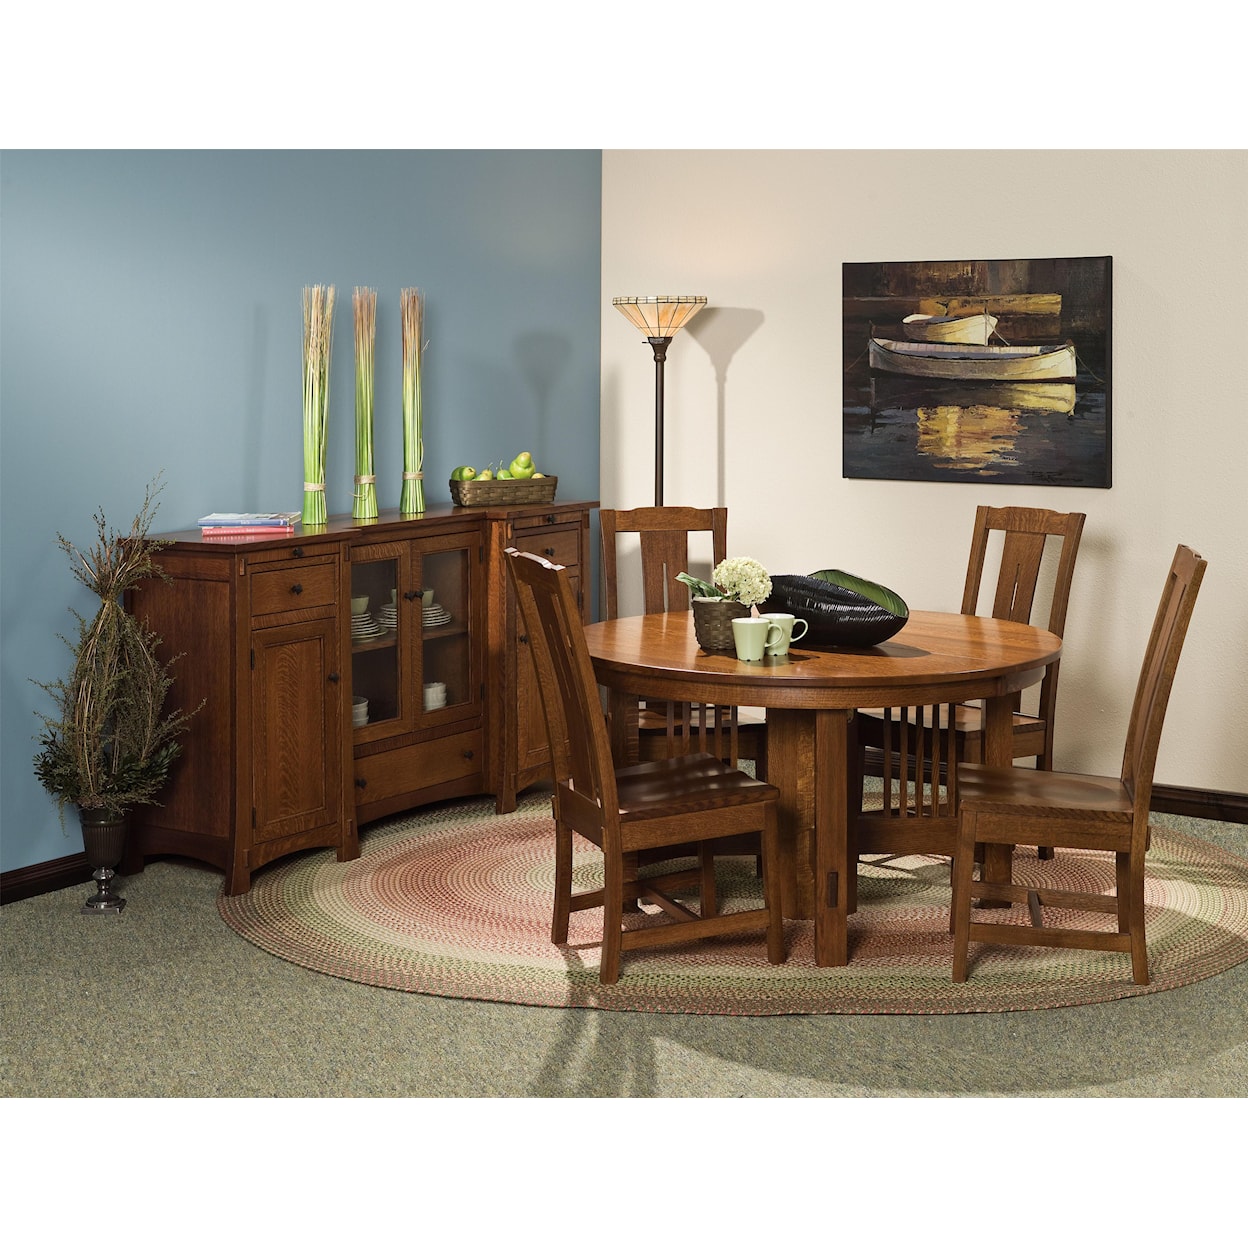 Amish Impressions by Fusion Designs Heartland 5 pc. 48" Table and Chairs Set